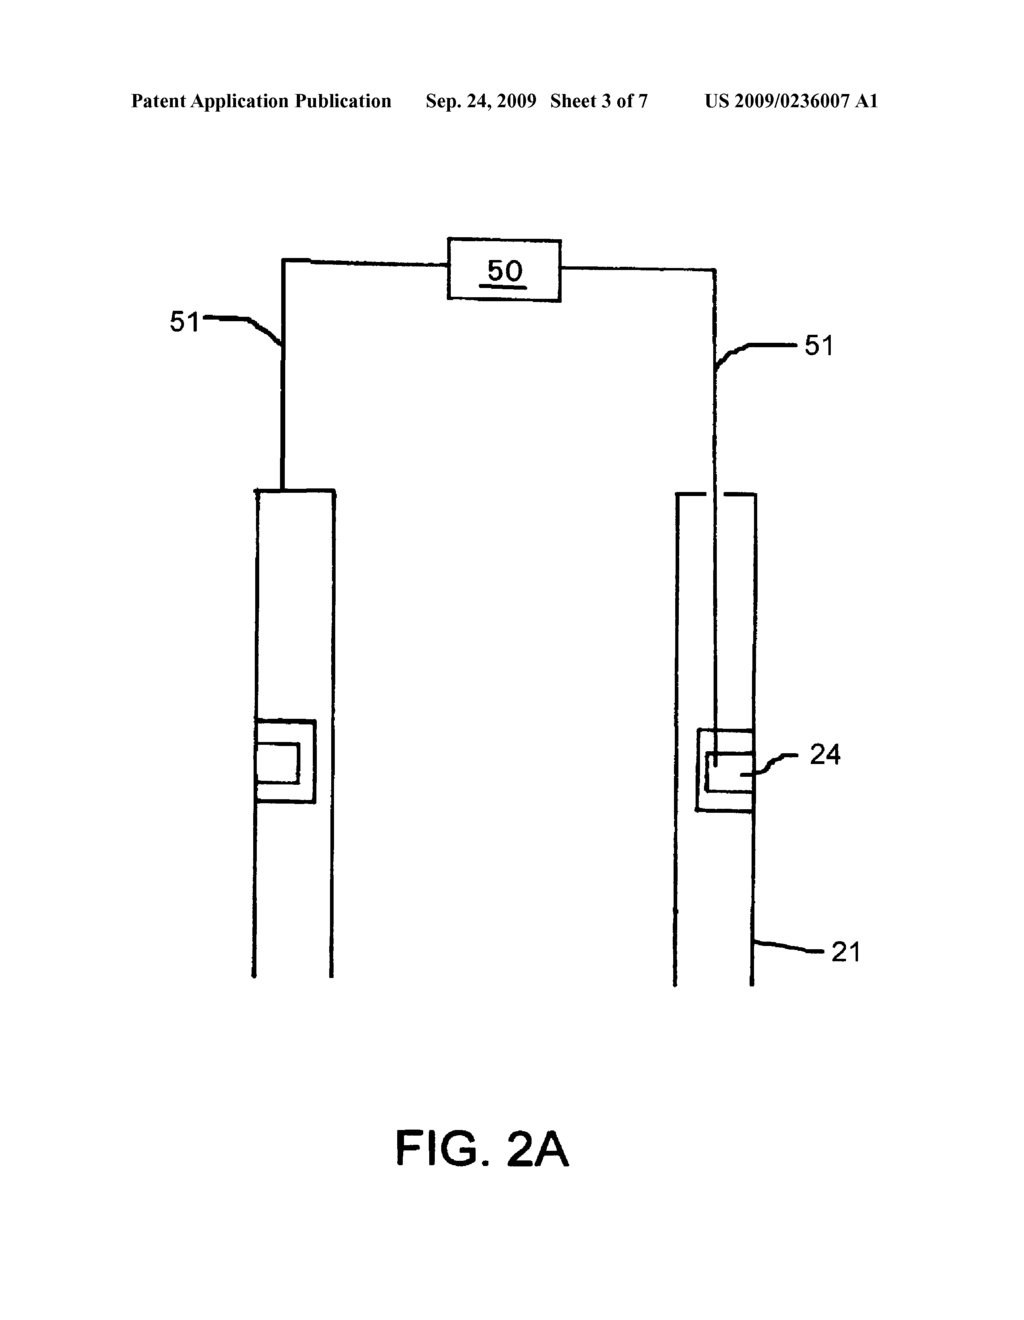 METHOD AND APPARATUS FOR FILLING BEVERAGE BOTTLES, IN A BEVERAGE BOTTLING PLANT, WITH A BEVERAGE MATERIAL COMPRISING A CARBONATED WATER COMPONENT AND A LIQUID FLAVORING COMPONENT, AND METHOD AND APPARATUS FOR FILLING CONTAINERS, IN A CONTAINER FILLING PLANT, WITH A MATERIAL COMPRISING A FIRST INGREDIENT AND A SECOND INGREDIENT - diagram, schematic, and image 04